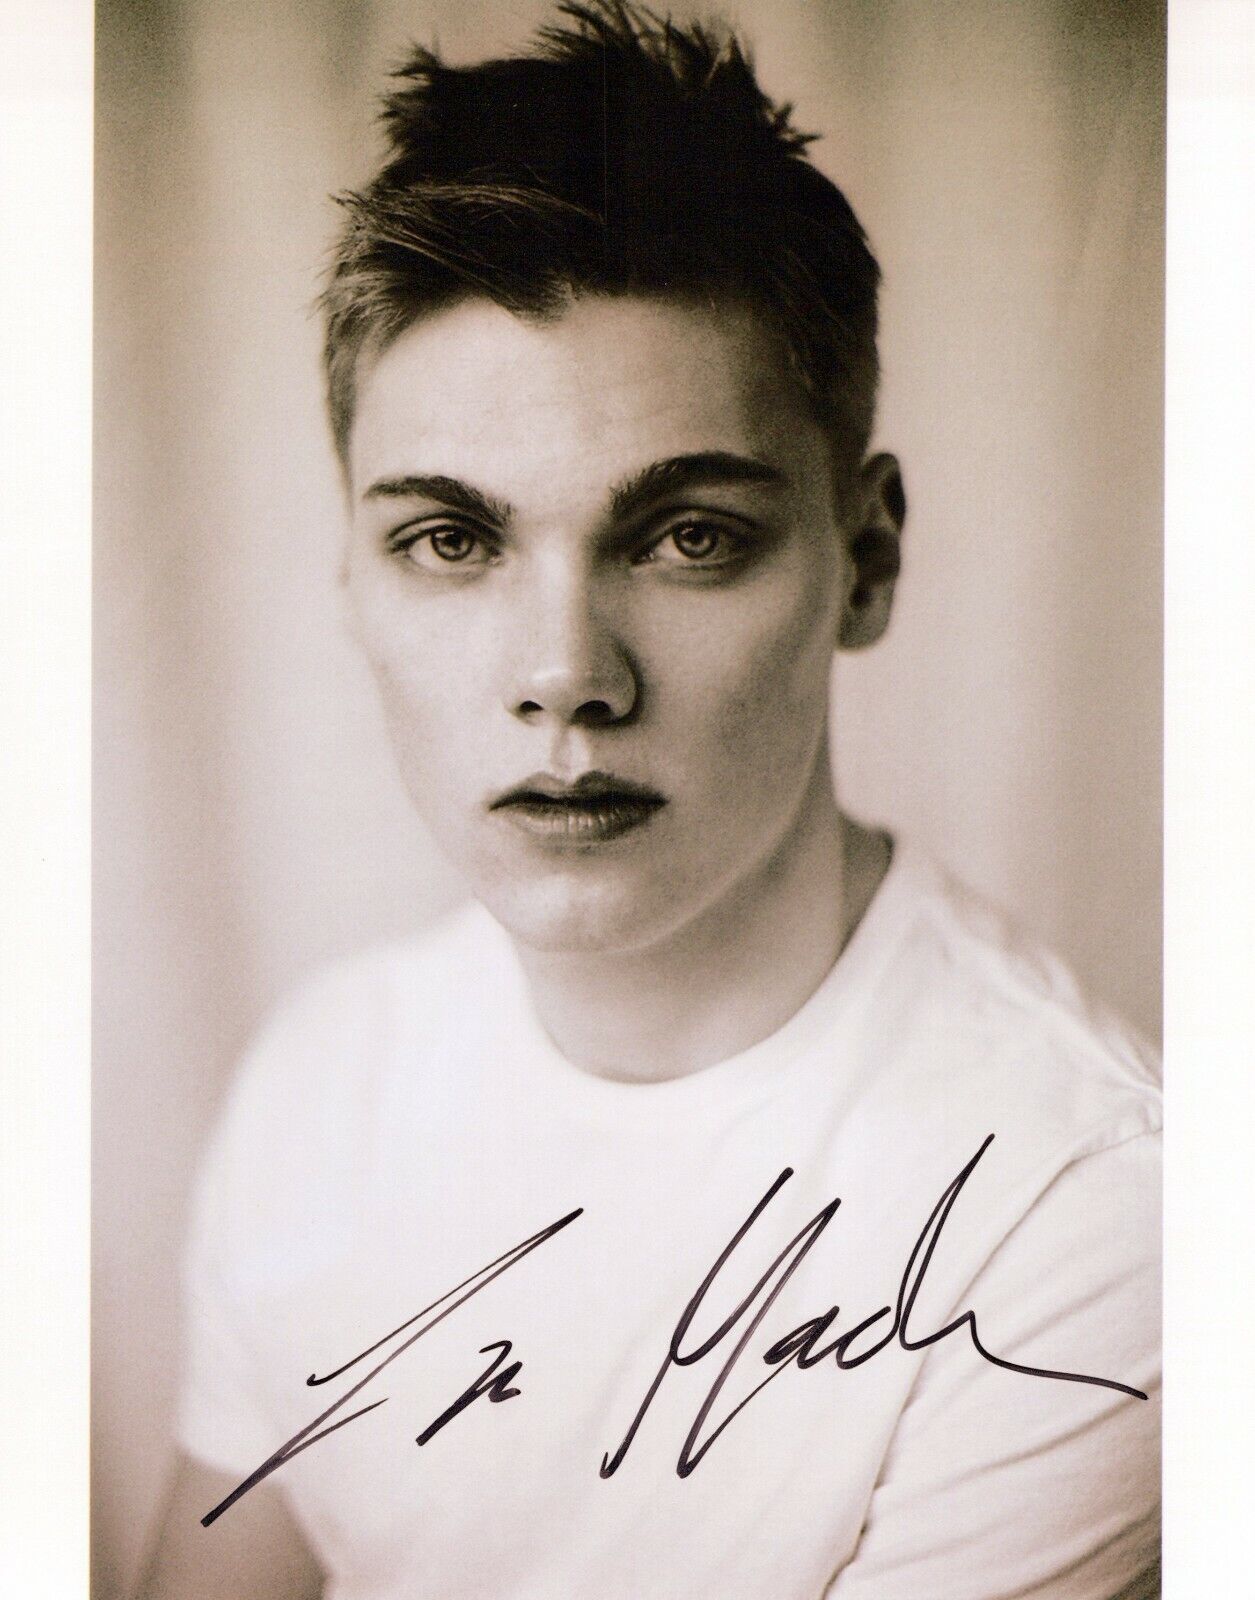 Levi Meaden head shot autographed Photo Poster painting signed 8x10 #2